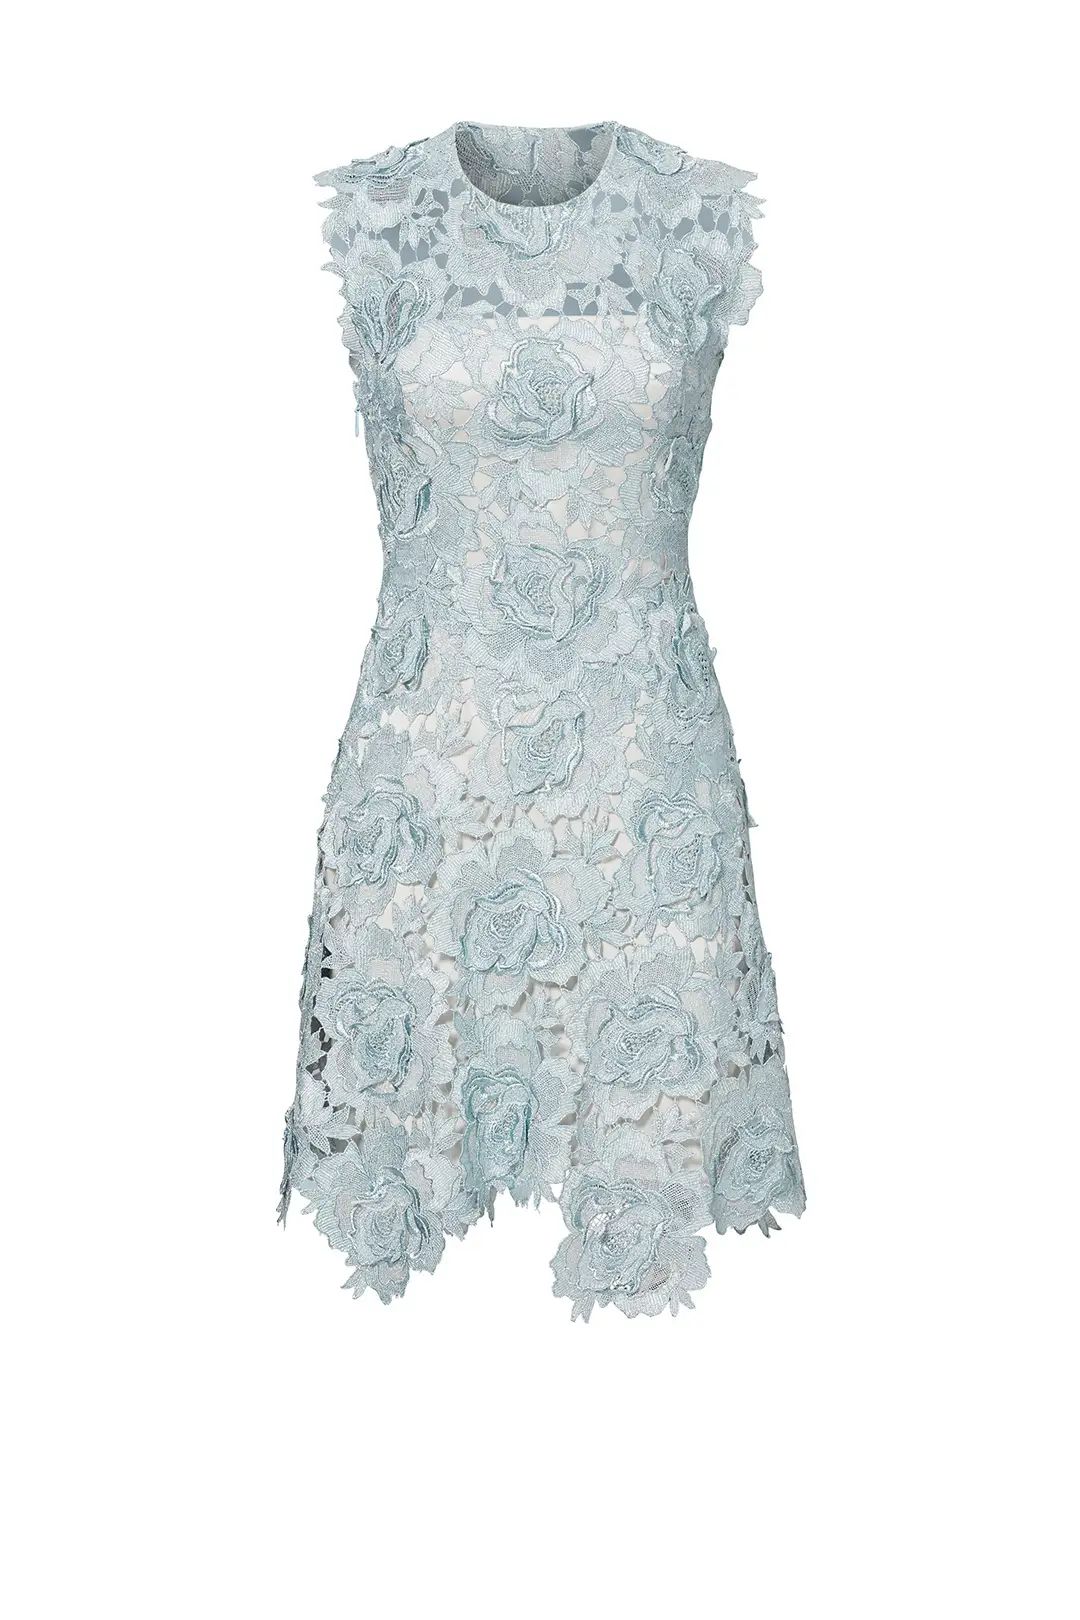 CATHERINE DEANE Blue Lace Fjola Dress | Rent The Runway